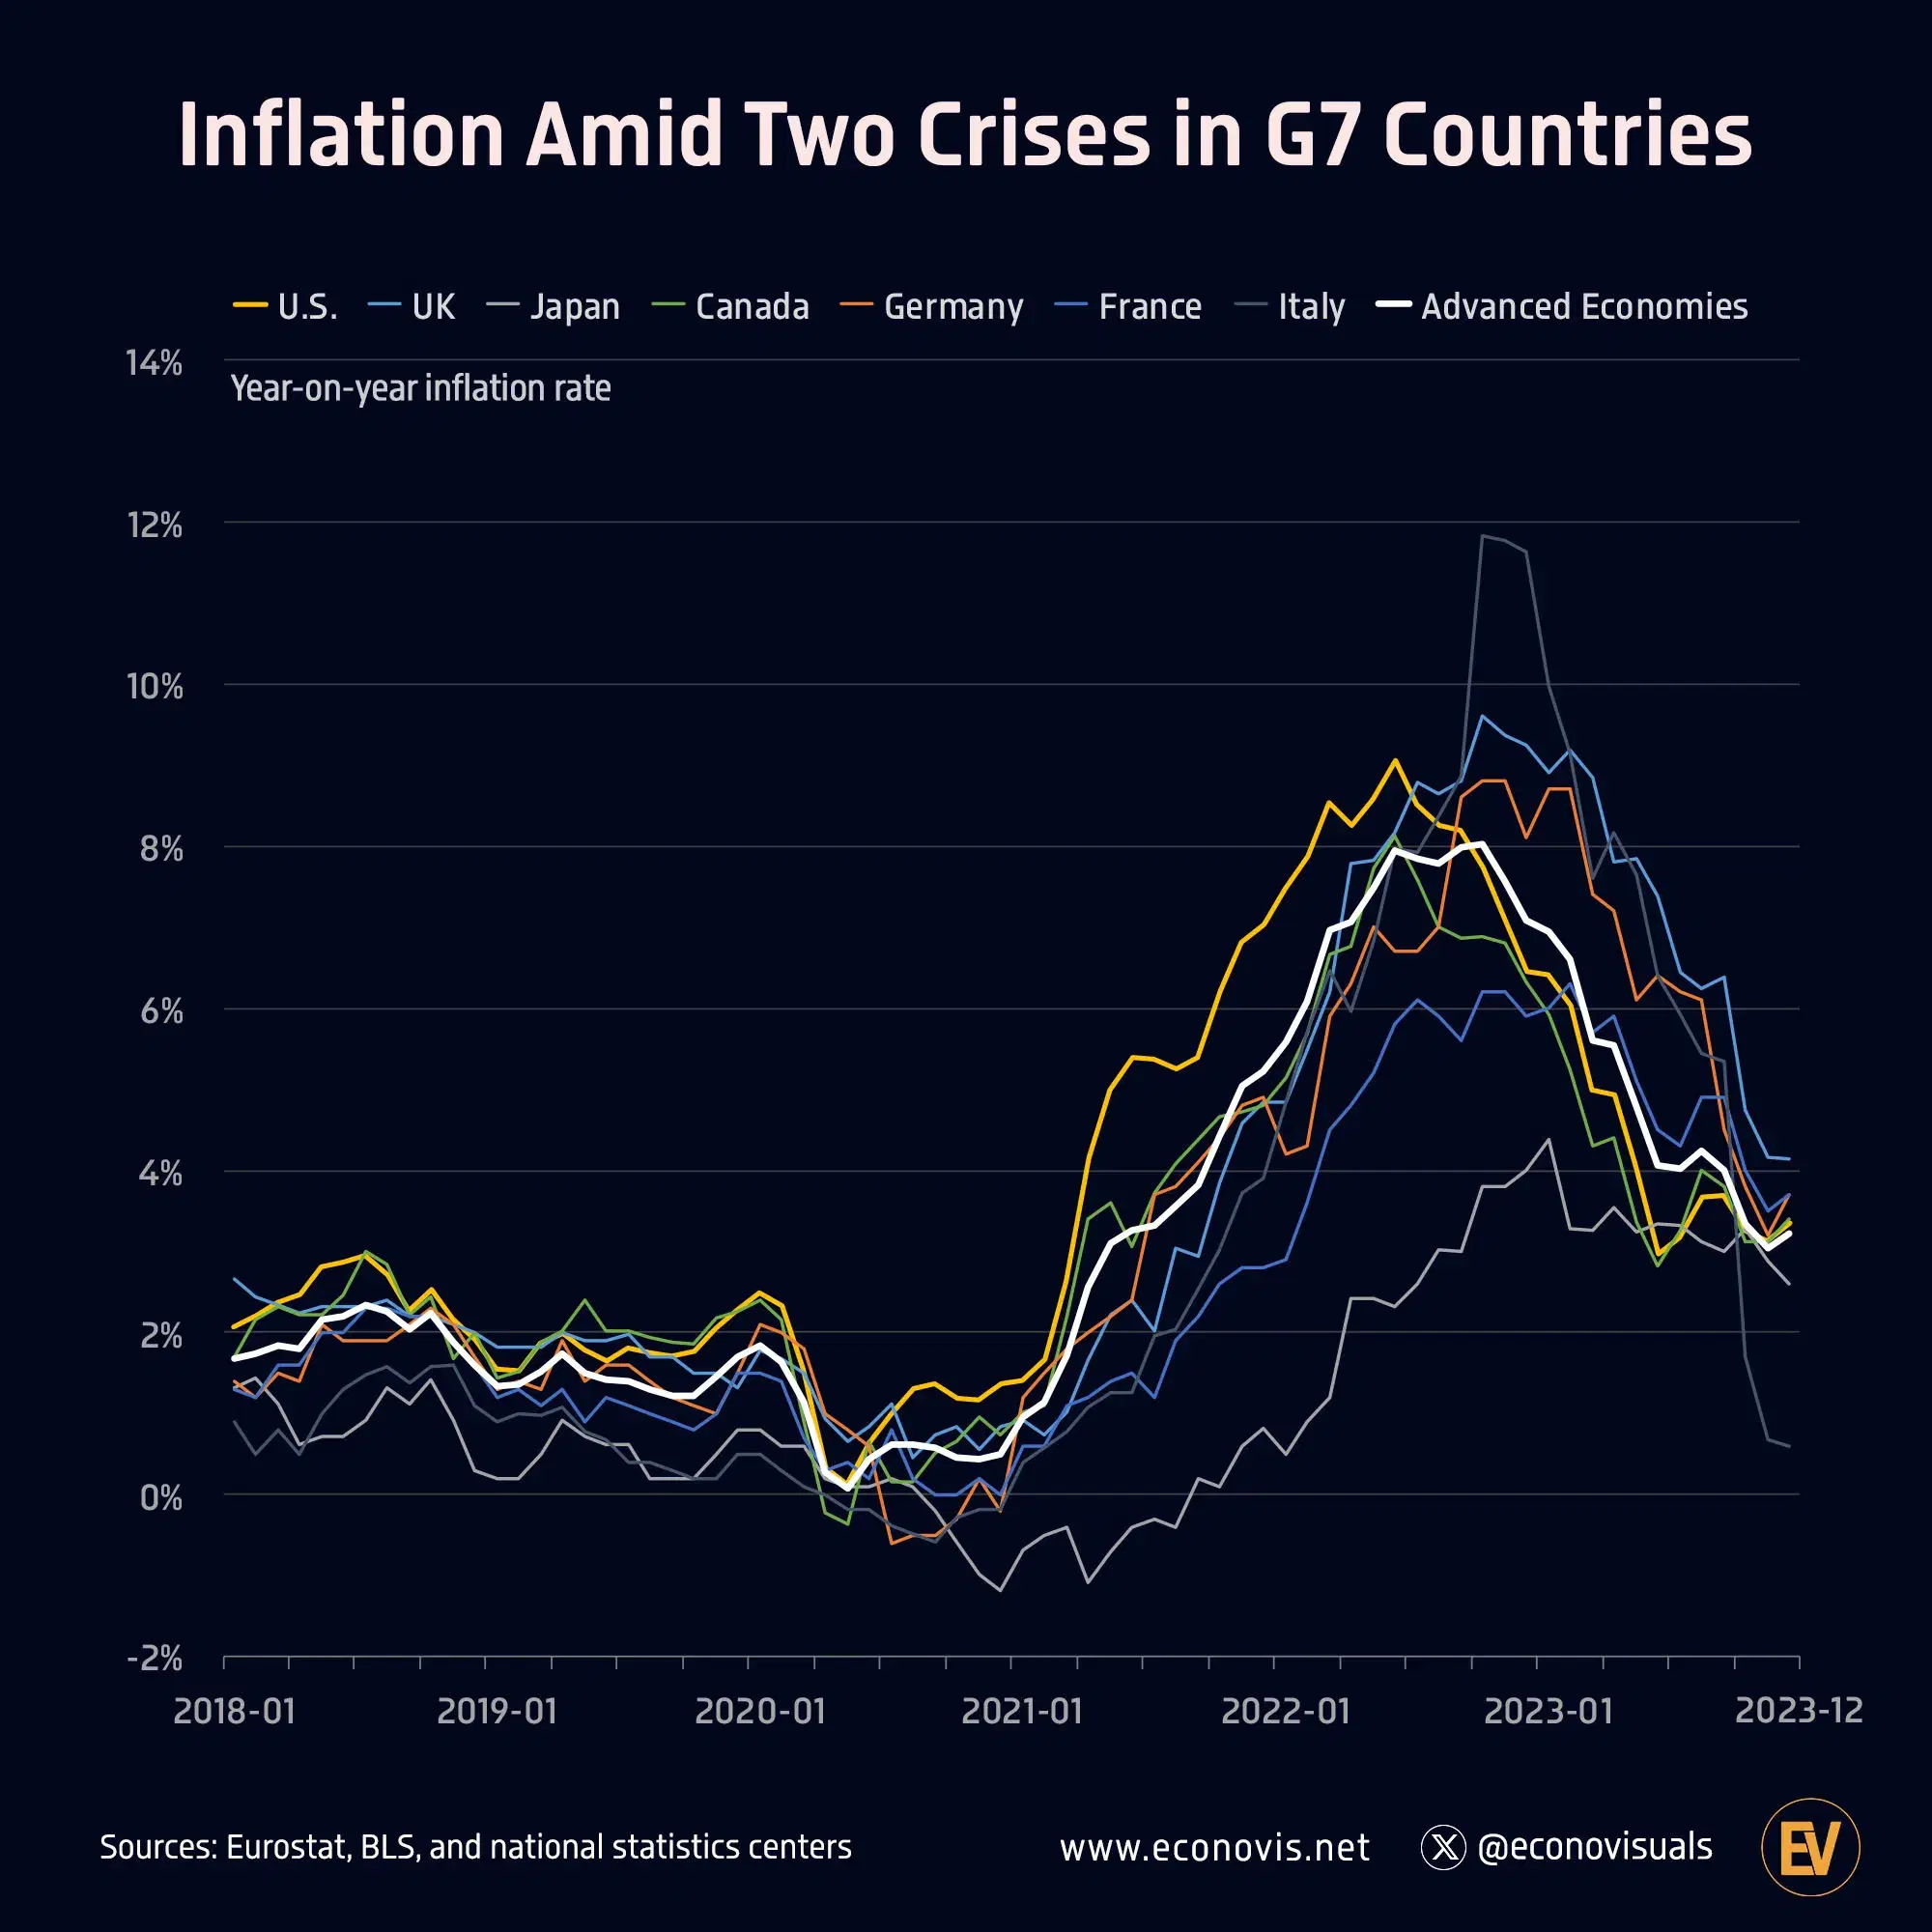 Inflation Amid Two Crises in G7 Countries